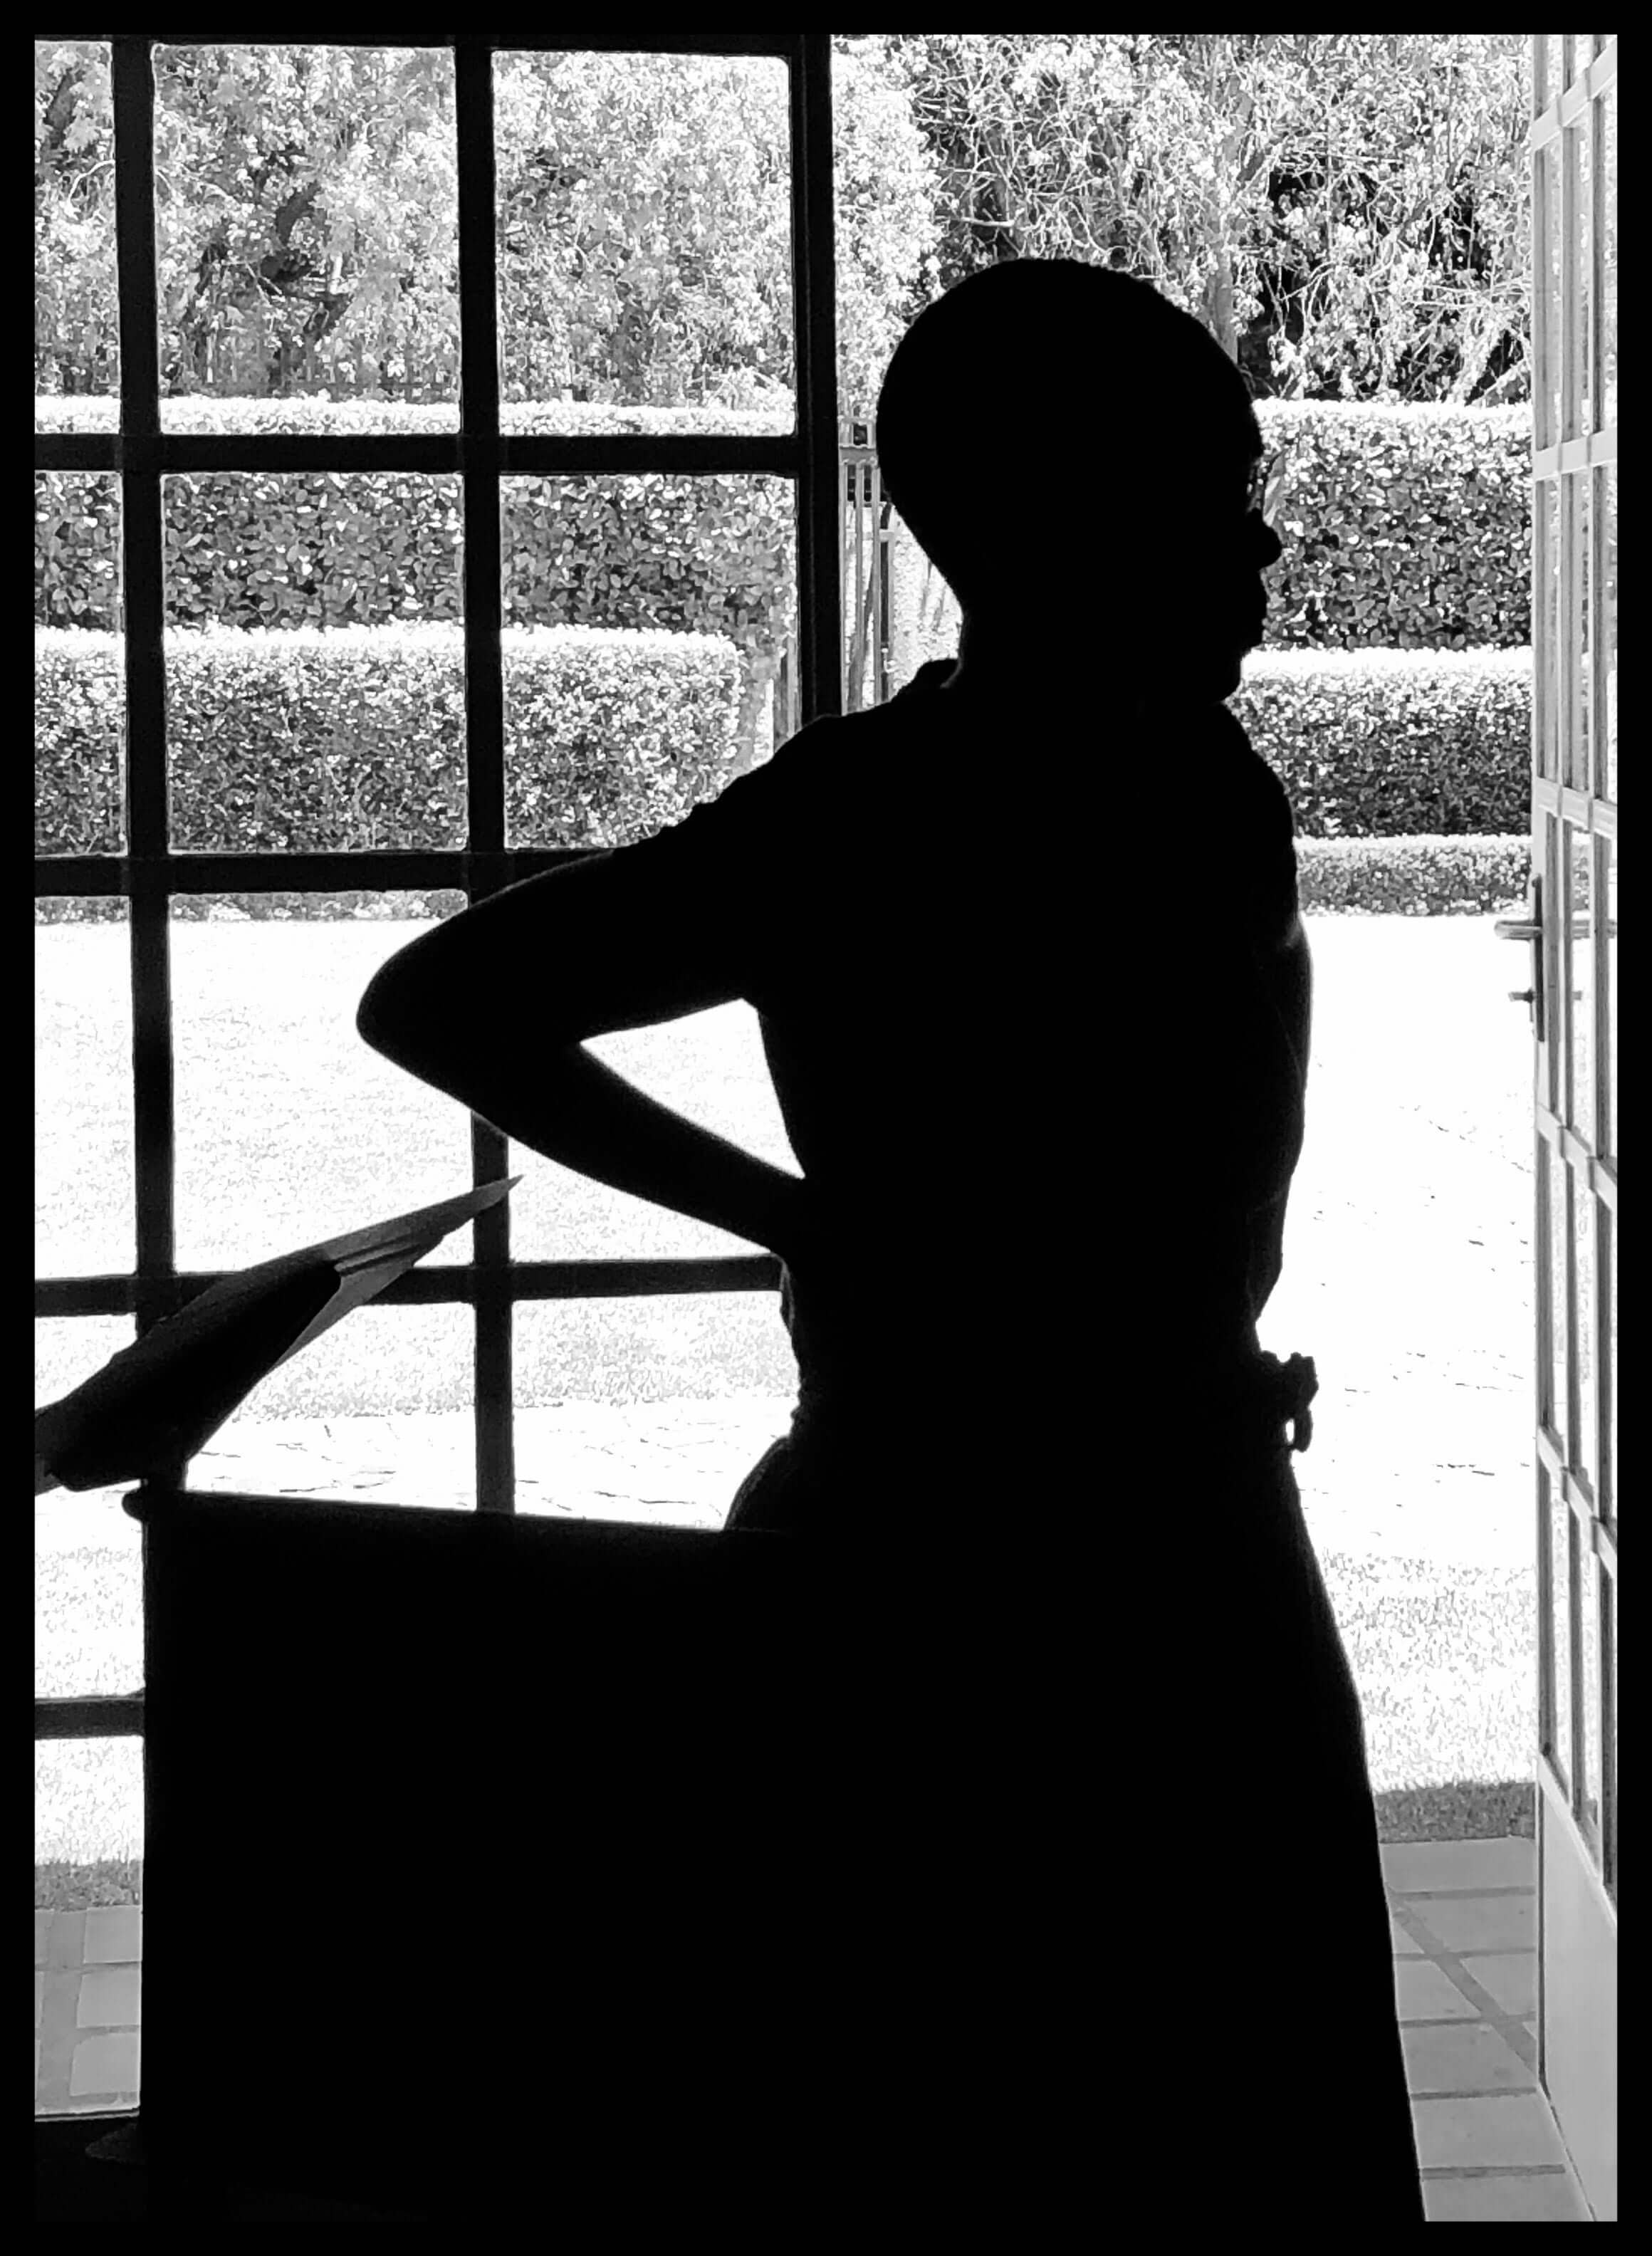 Still from Milisuthando (working title). A person is standing with their hands on their hips in front of a windowed door open to an outside garden area. Backlit, black and white photo.